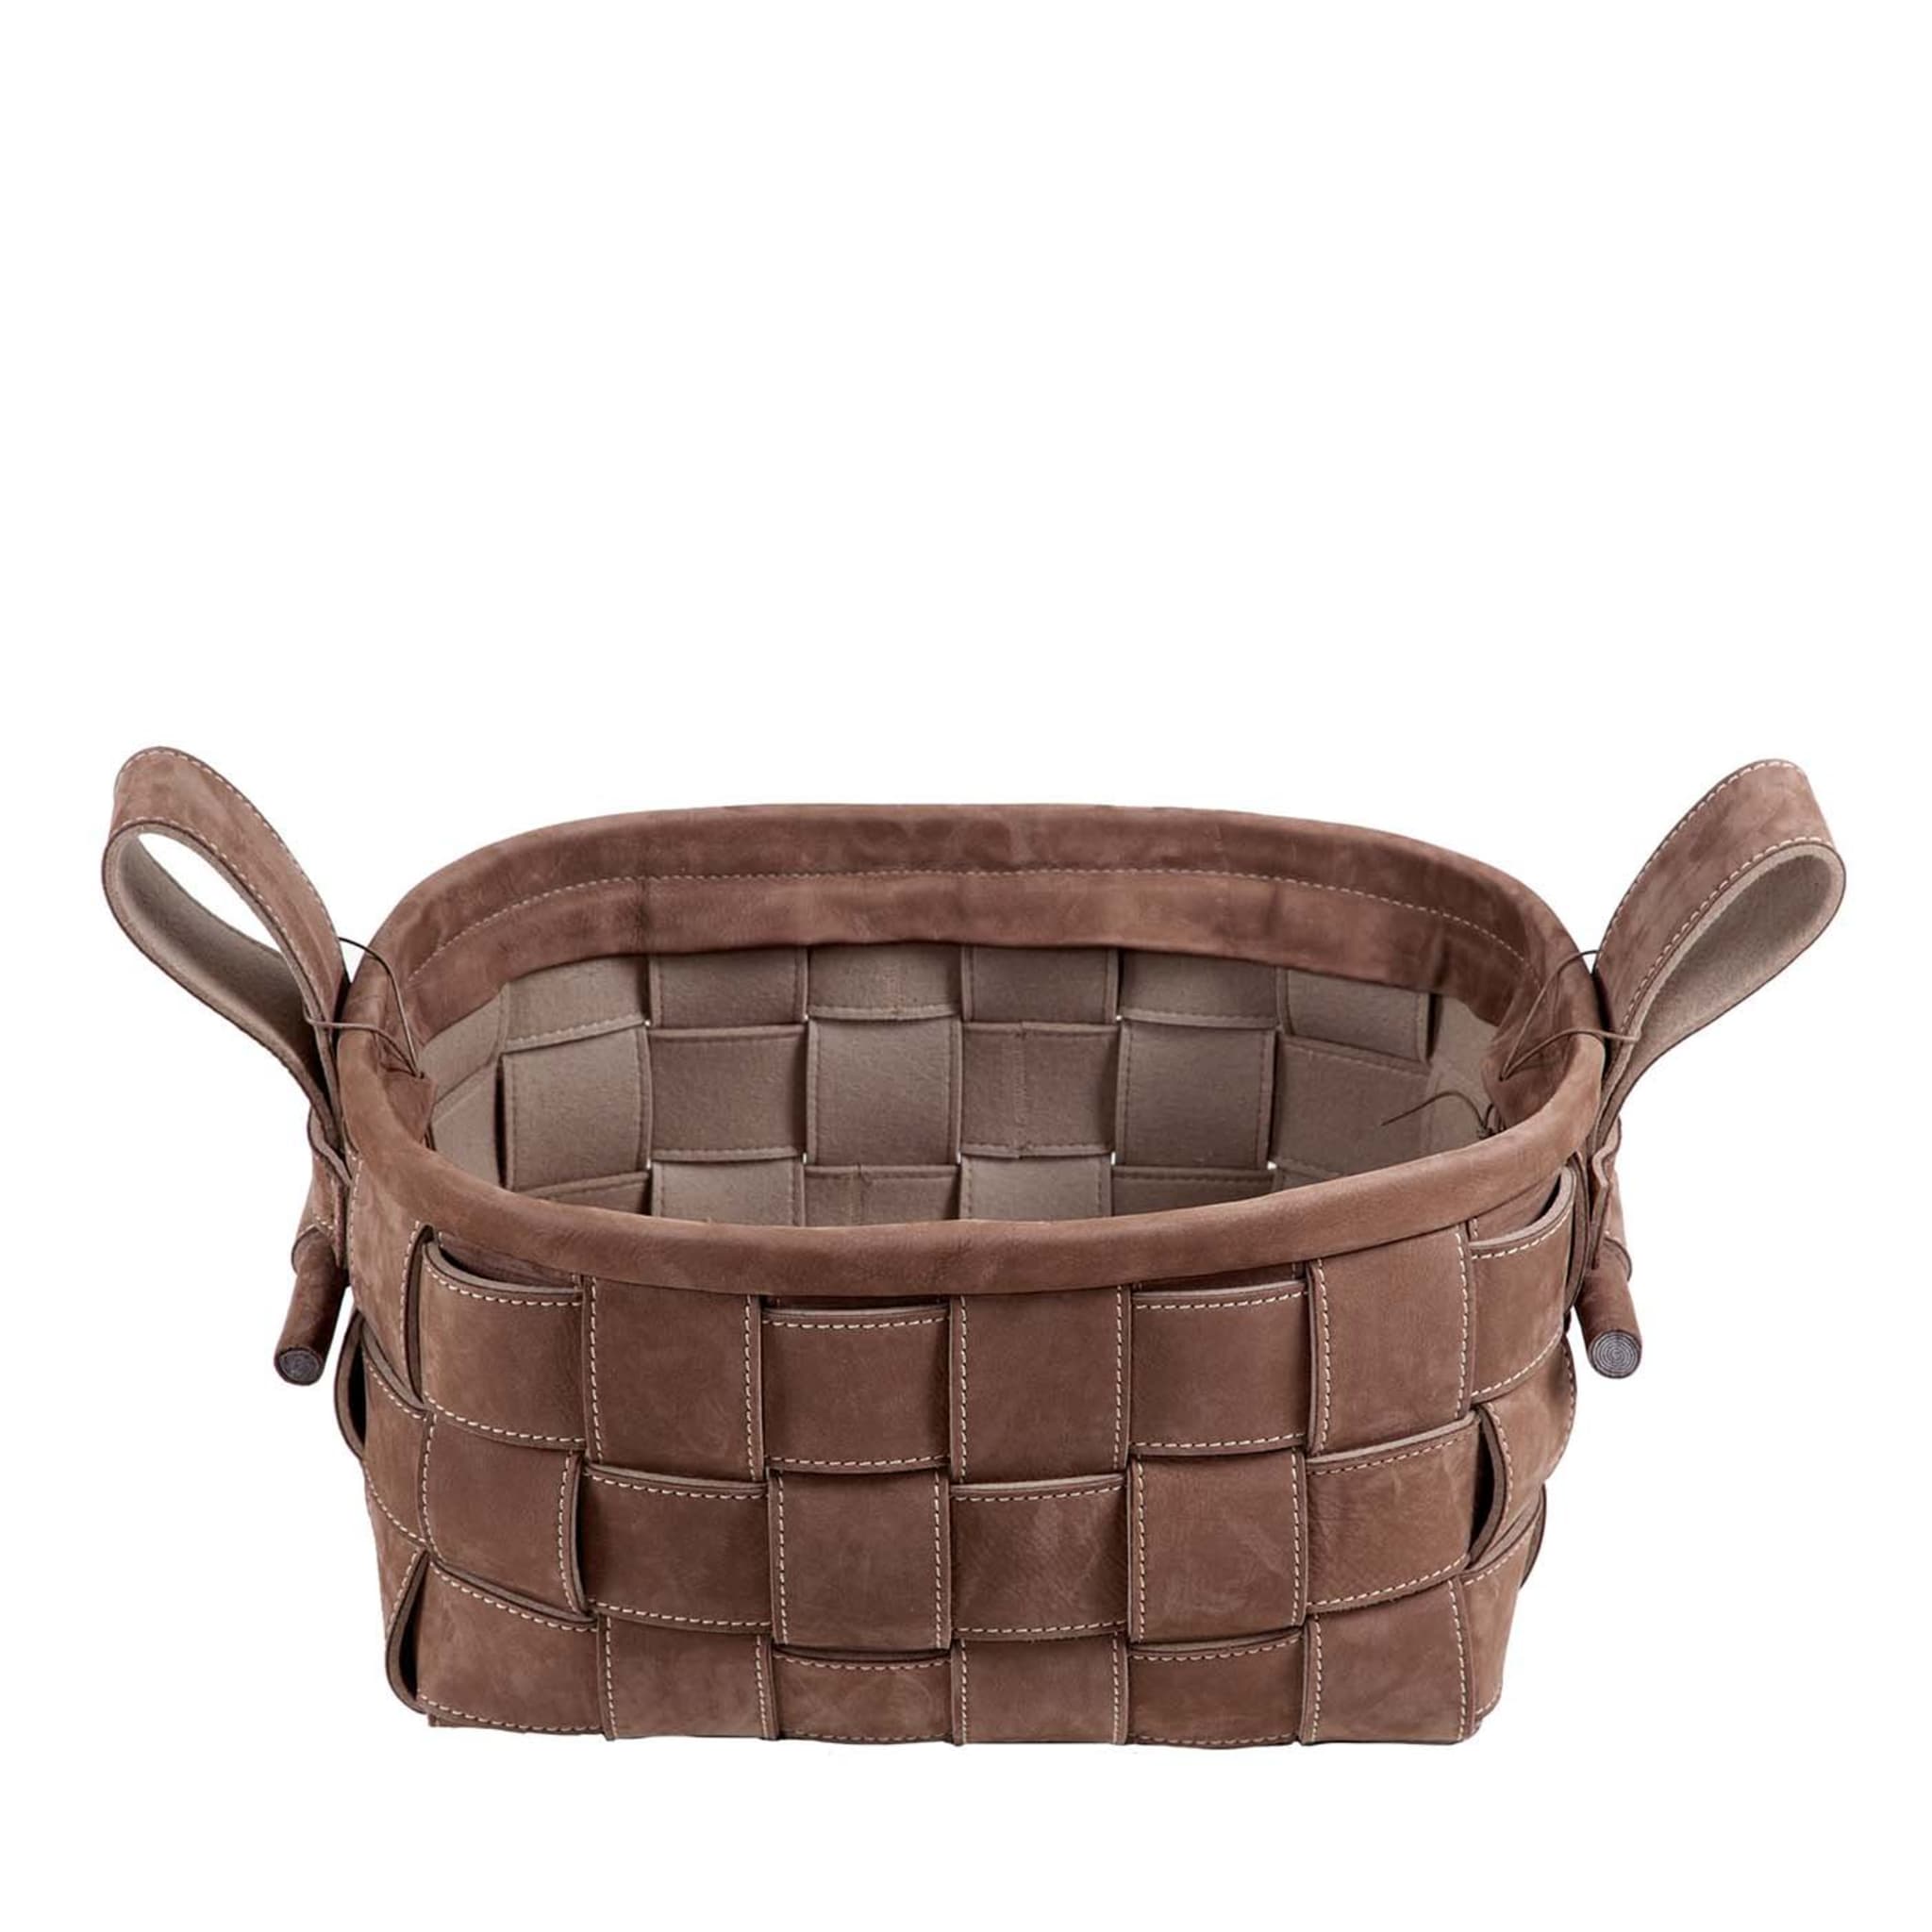 Woven Leather Basket Brown - Main view